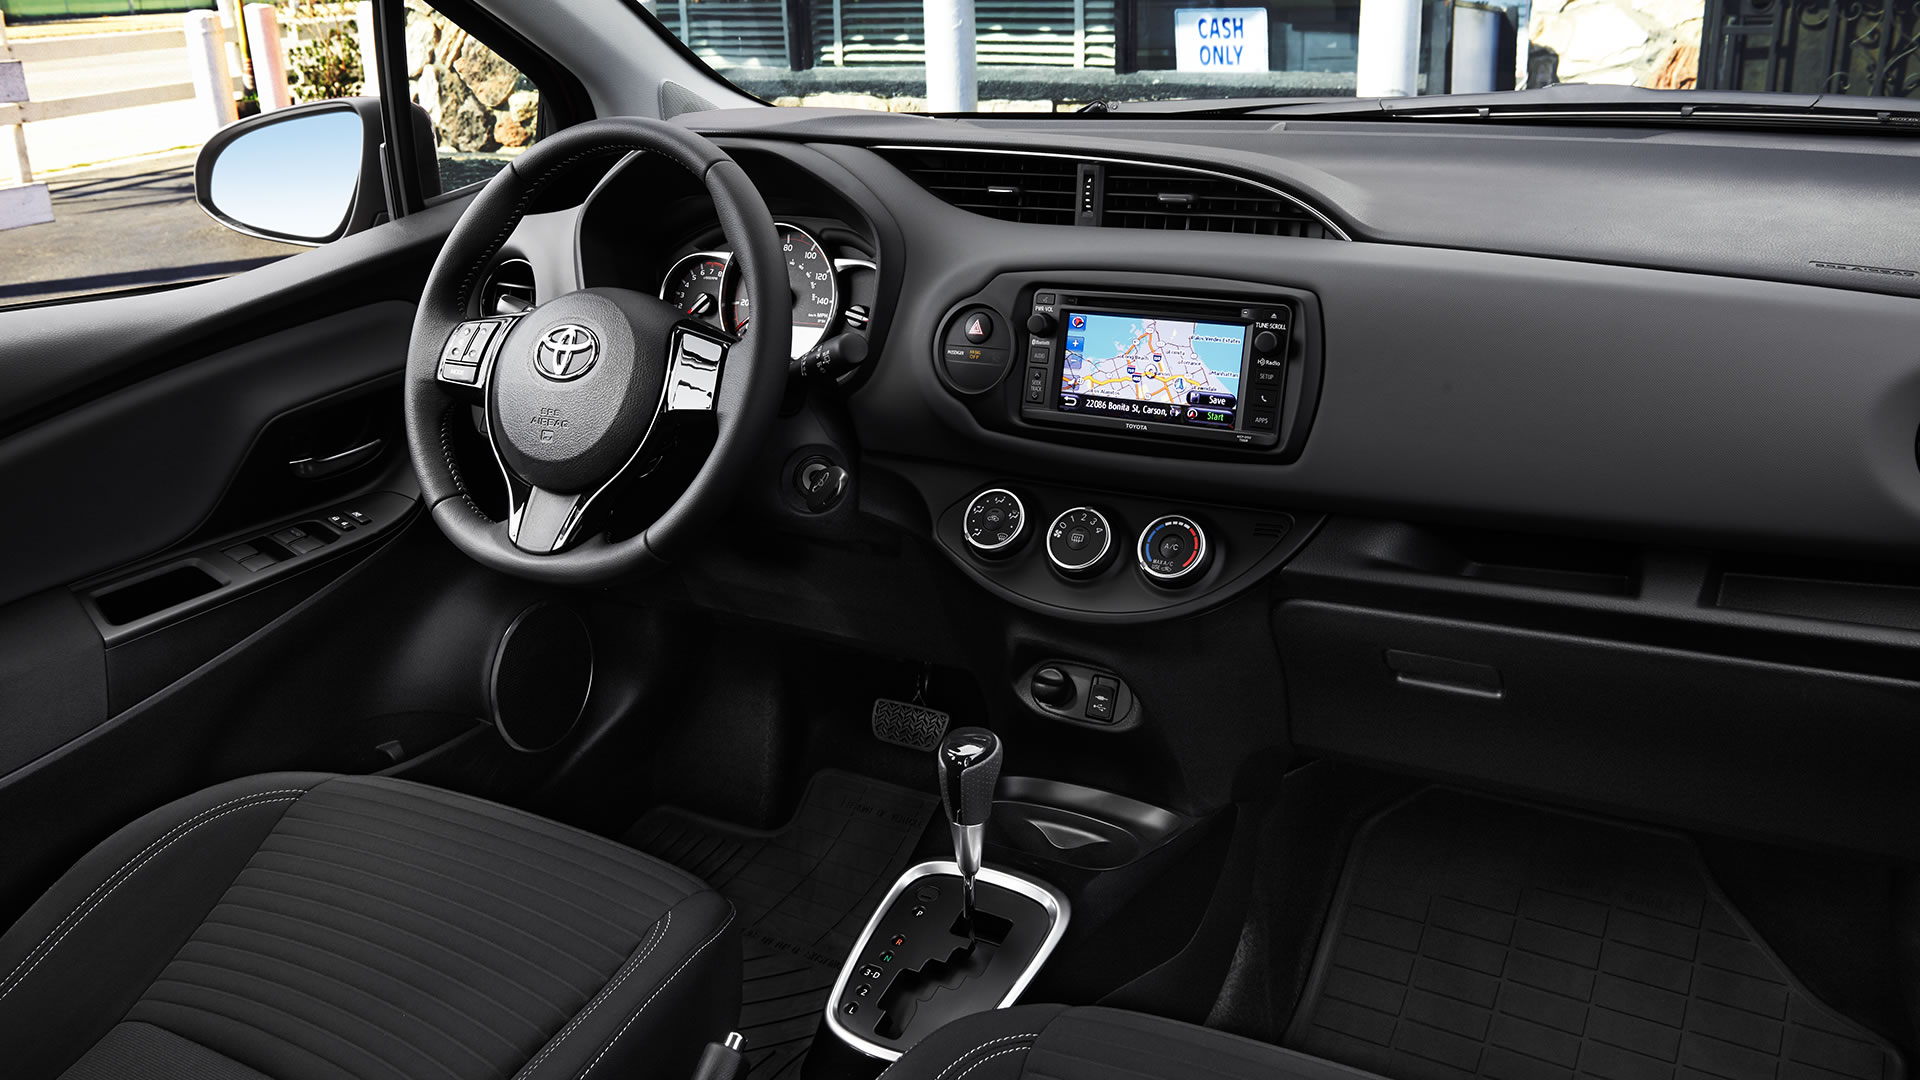 Yaris and Yaris iA: What's the Difference? - Deacon Jones Toyota of Clinton